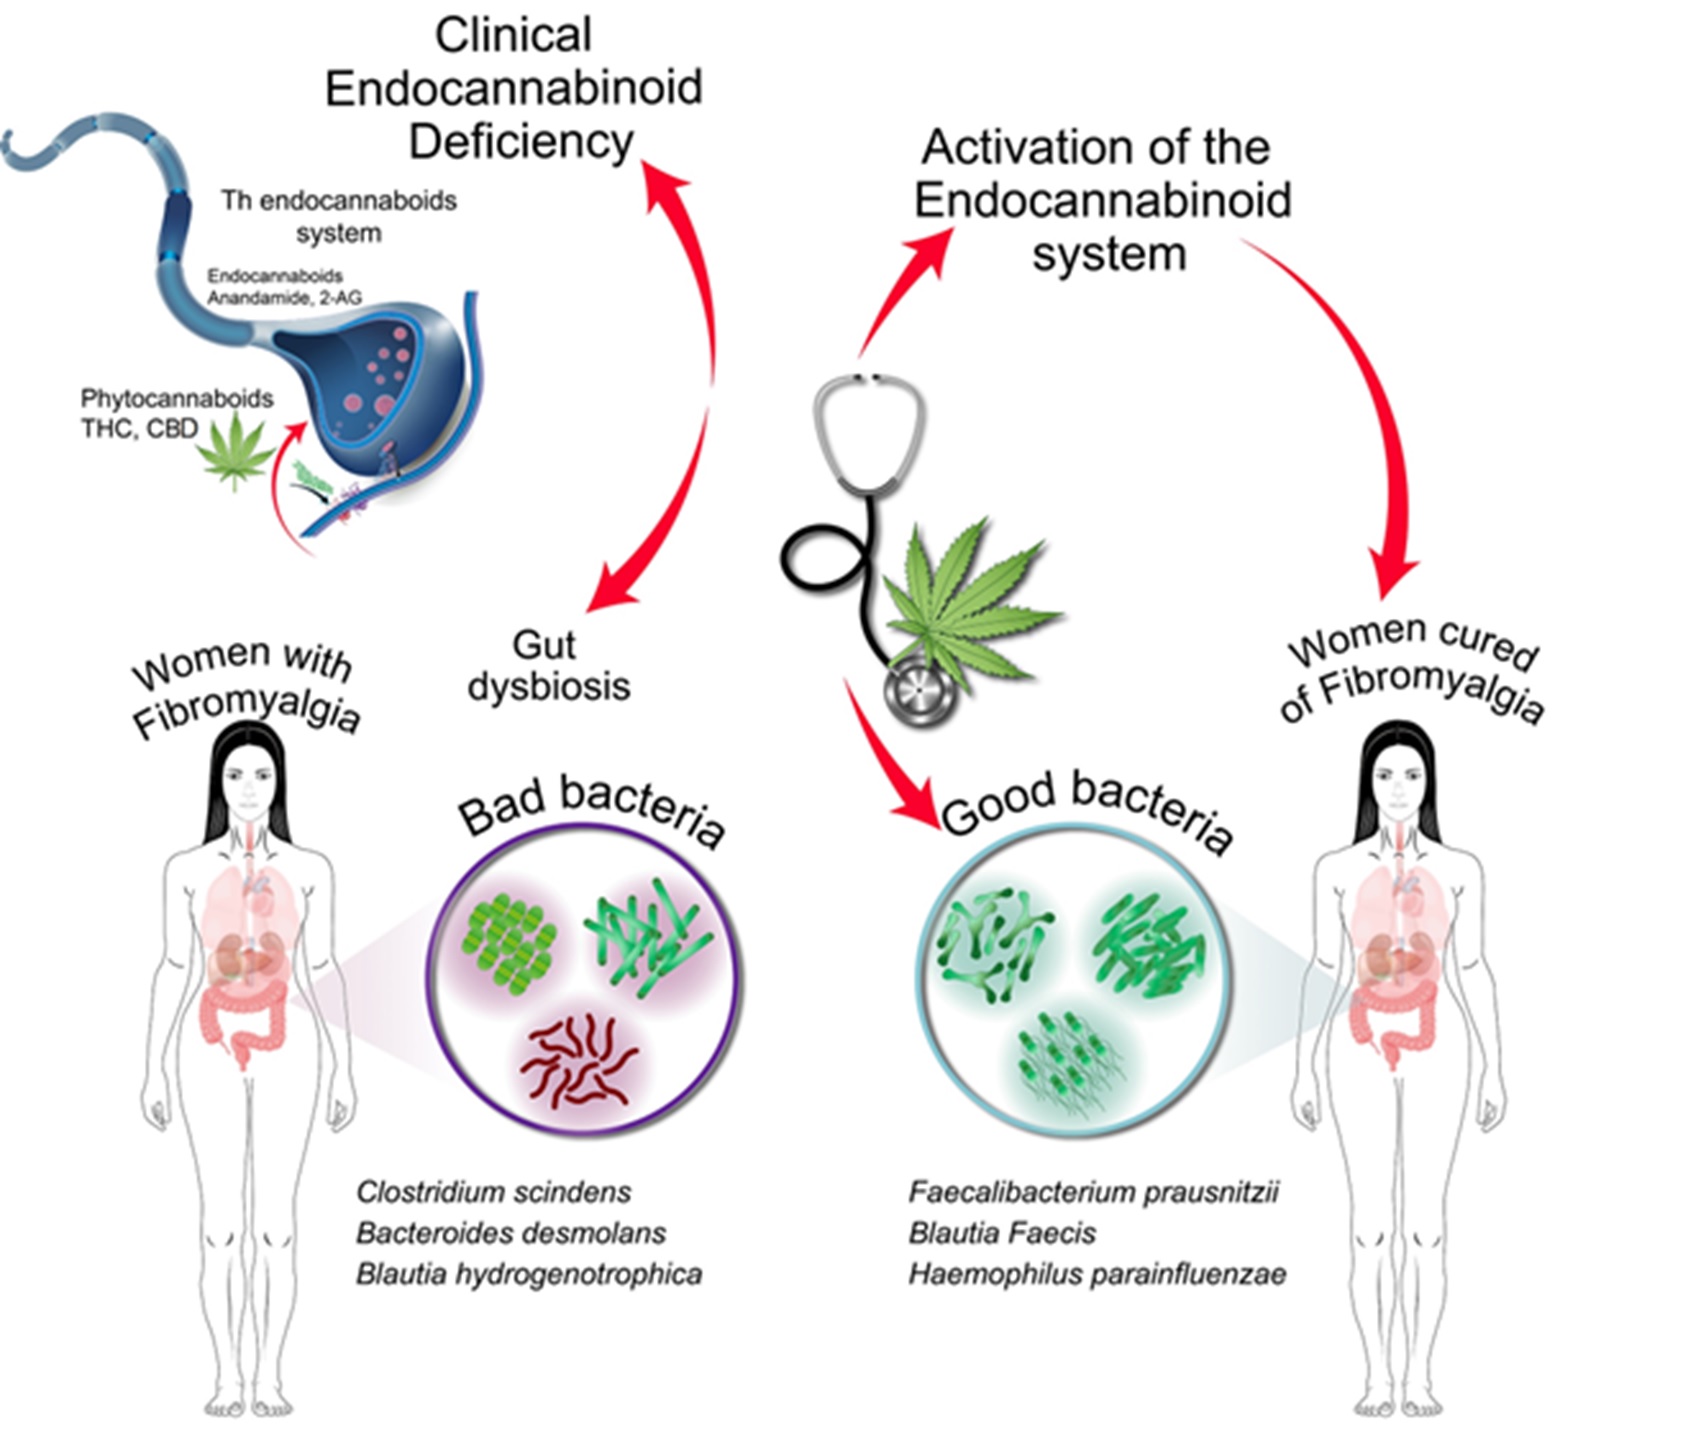 Project FibroCanBiome – “Preclinical and Clinical Evidence on the Alteration of Cannabinoids-Gut Microbiome link in Fibromyalgia: a Proof-of-Concept Study in Malta”